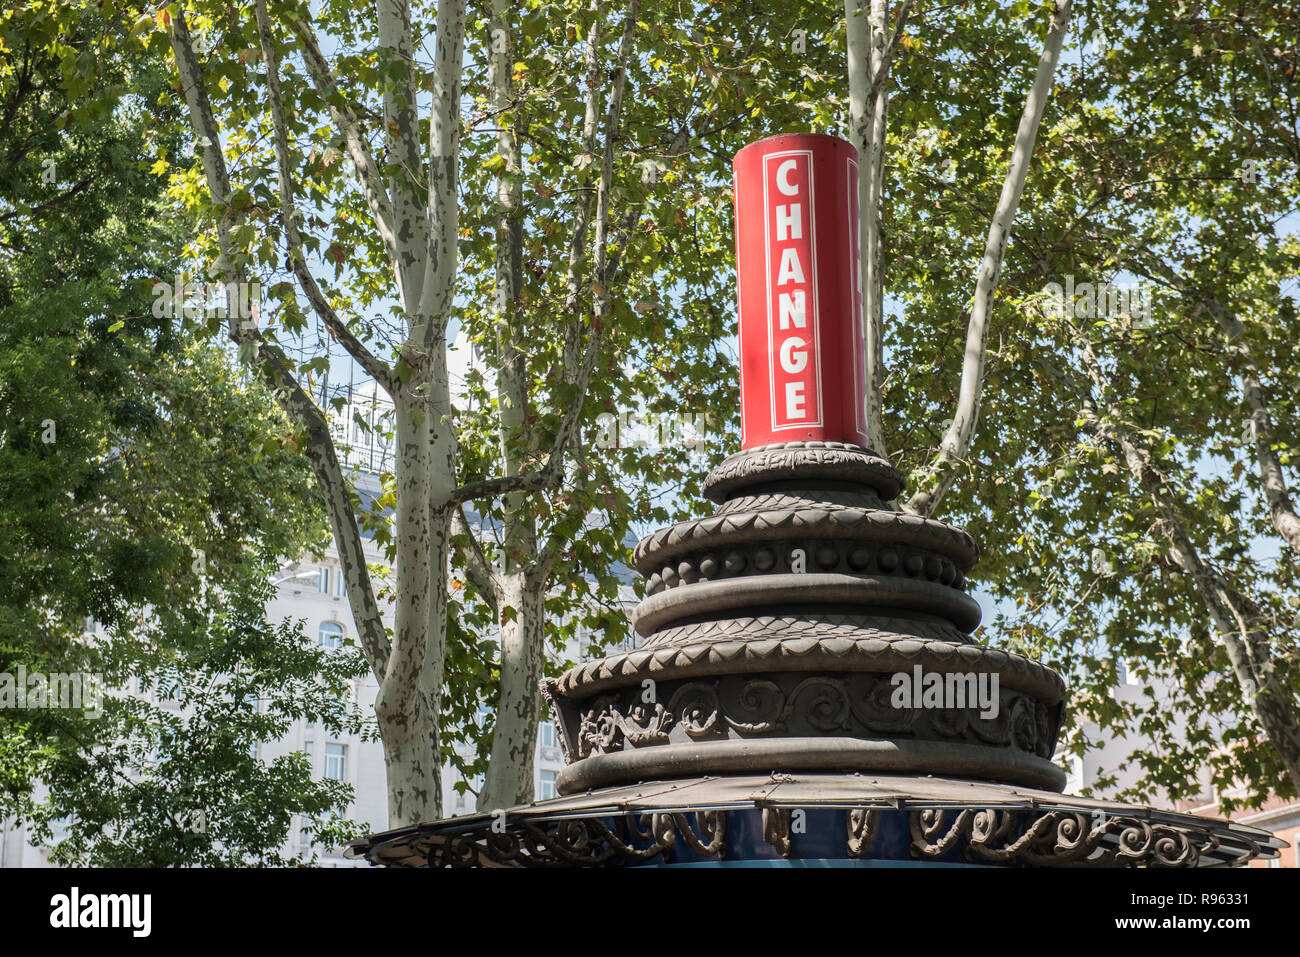 An old architectural pillar with a text signboard on it. The word Change is written on it. On the background, trees are seen along with the blue sky. Stock Photo